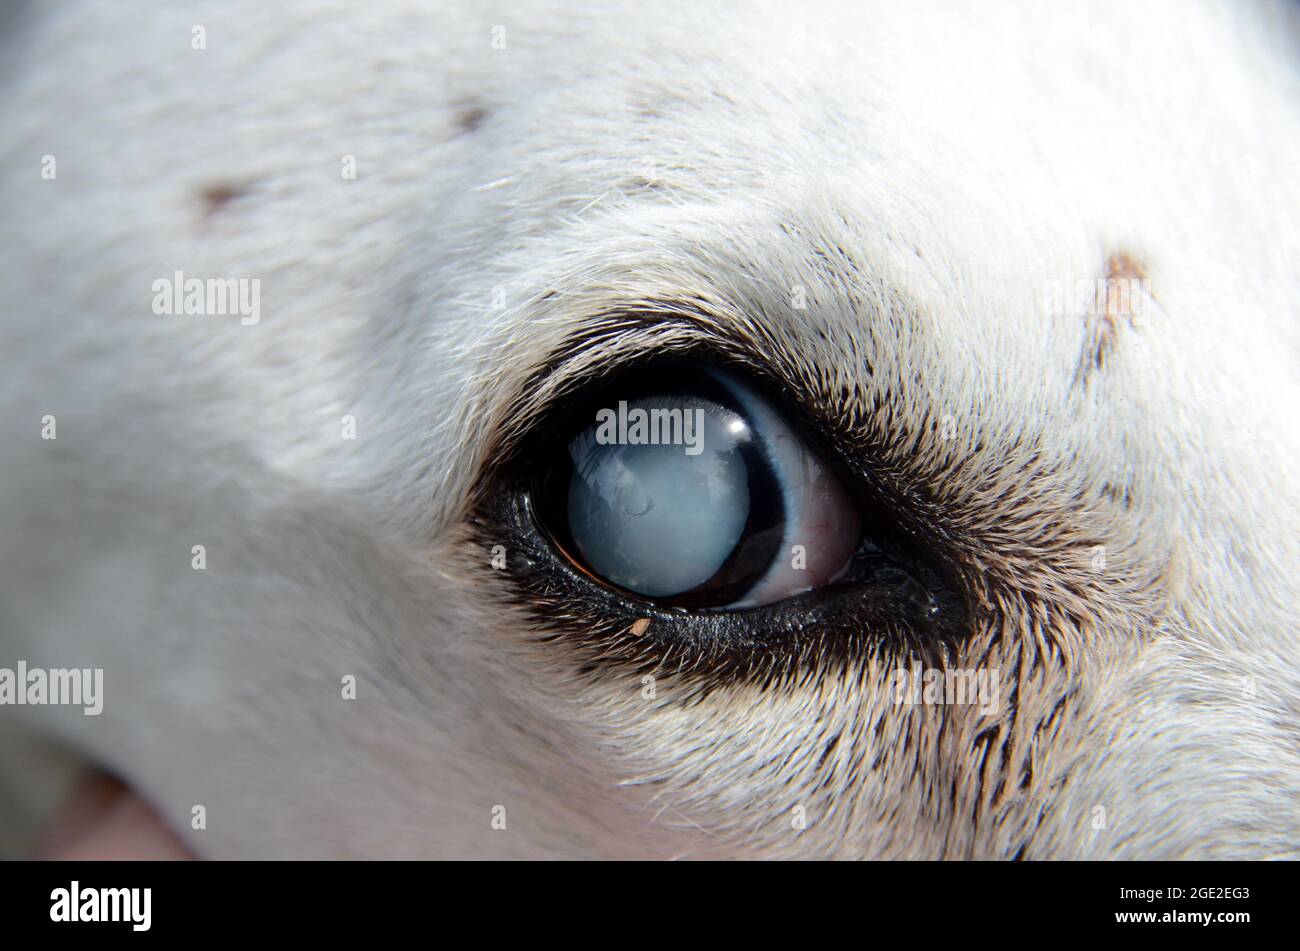 View into a dog's eye that is affected by cataract Stock Photo